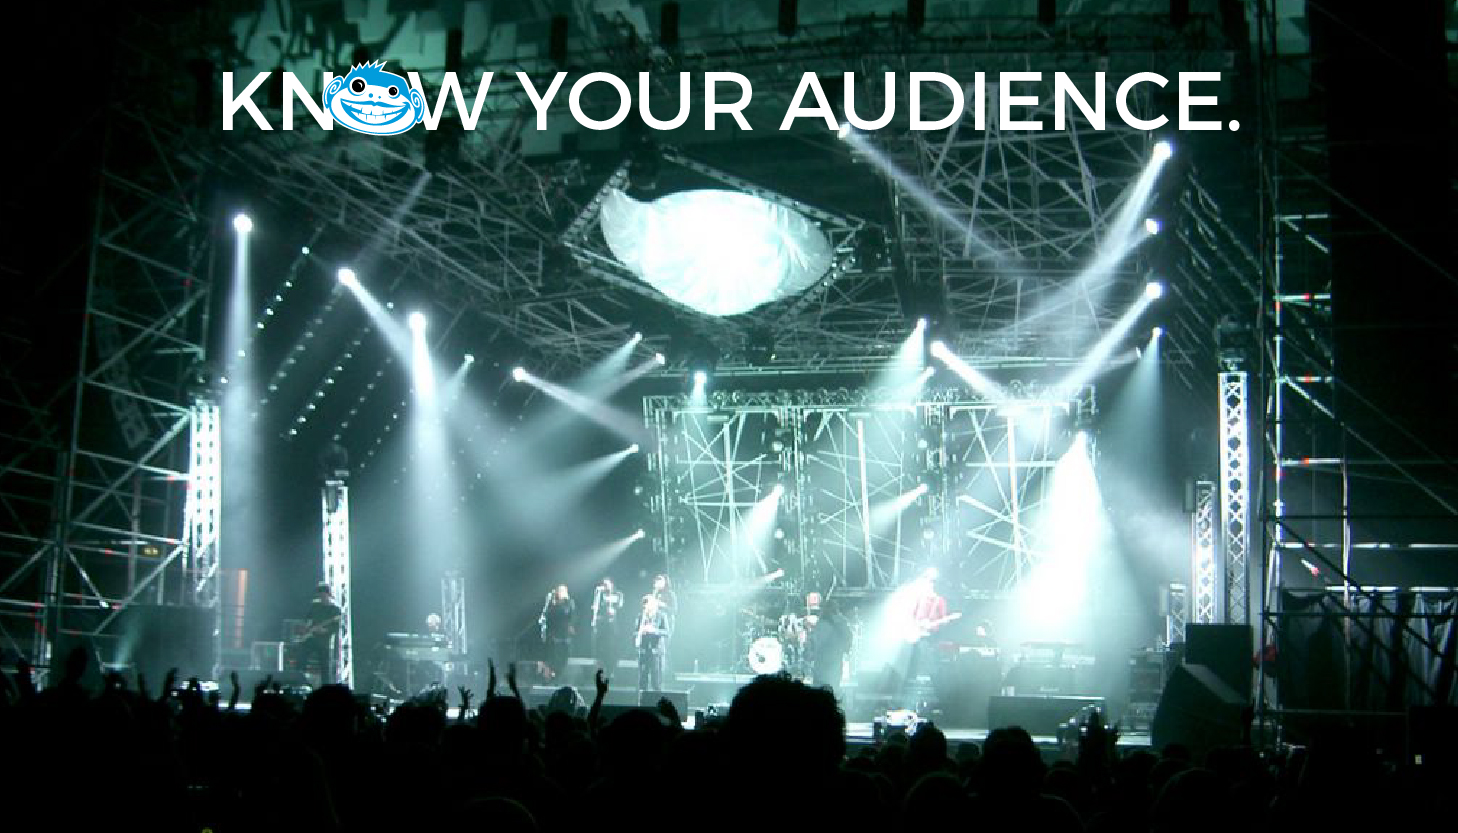 As a leader, know your audience